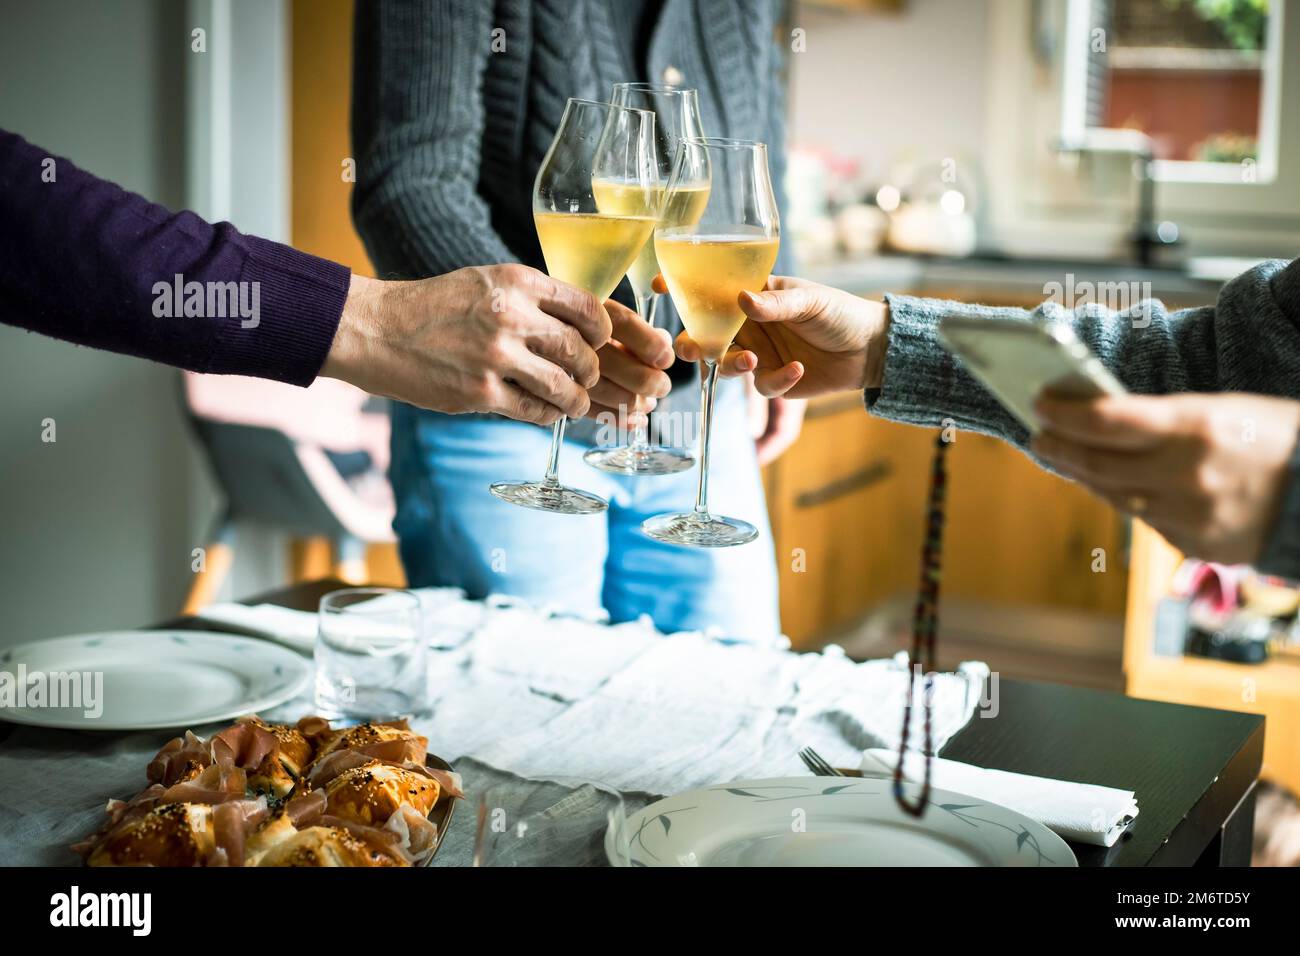 Three people celebrate Christmas by clinking glasses of prosecco at their home celebration dinner. Stock Photo